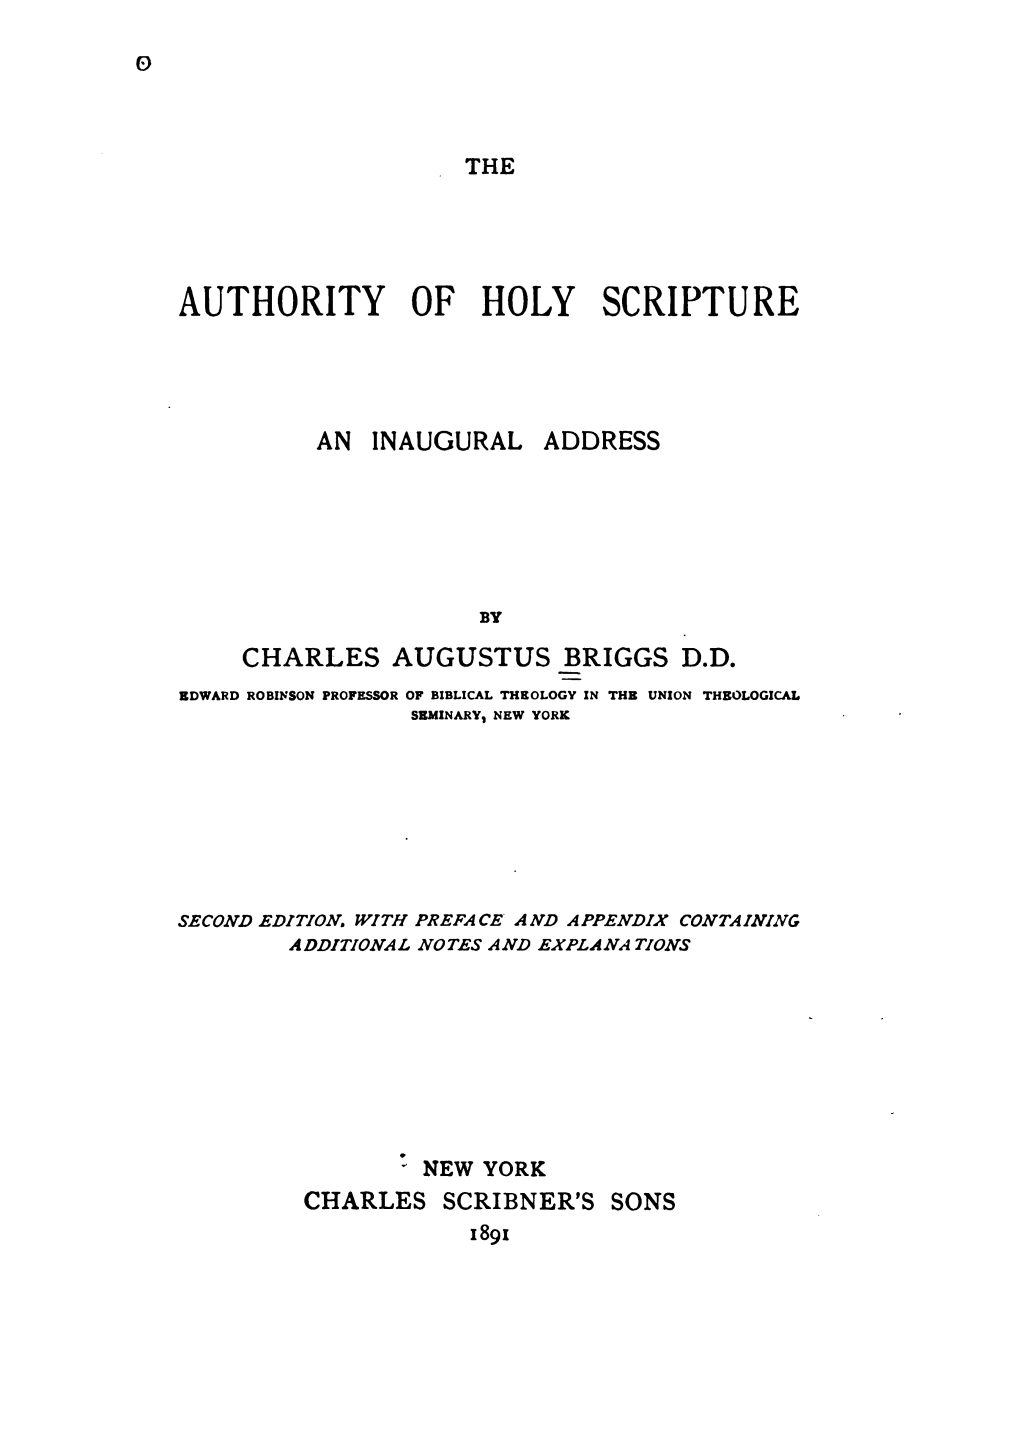 The Authority of Holy Scripture: an Inaugural Address